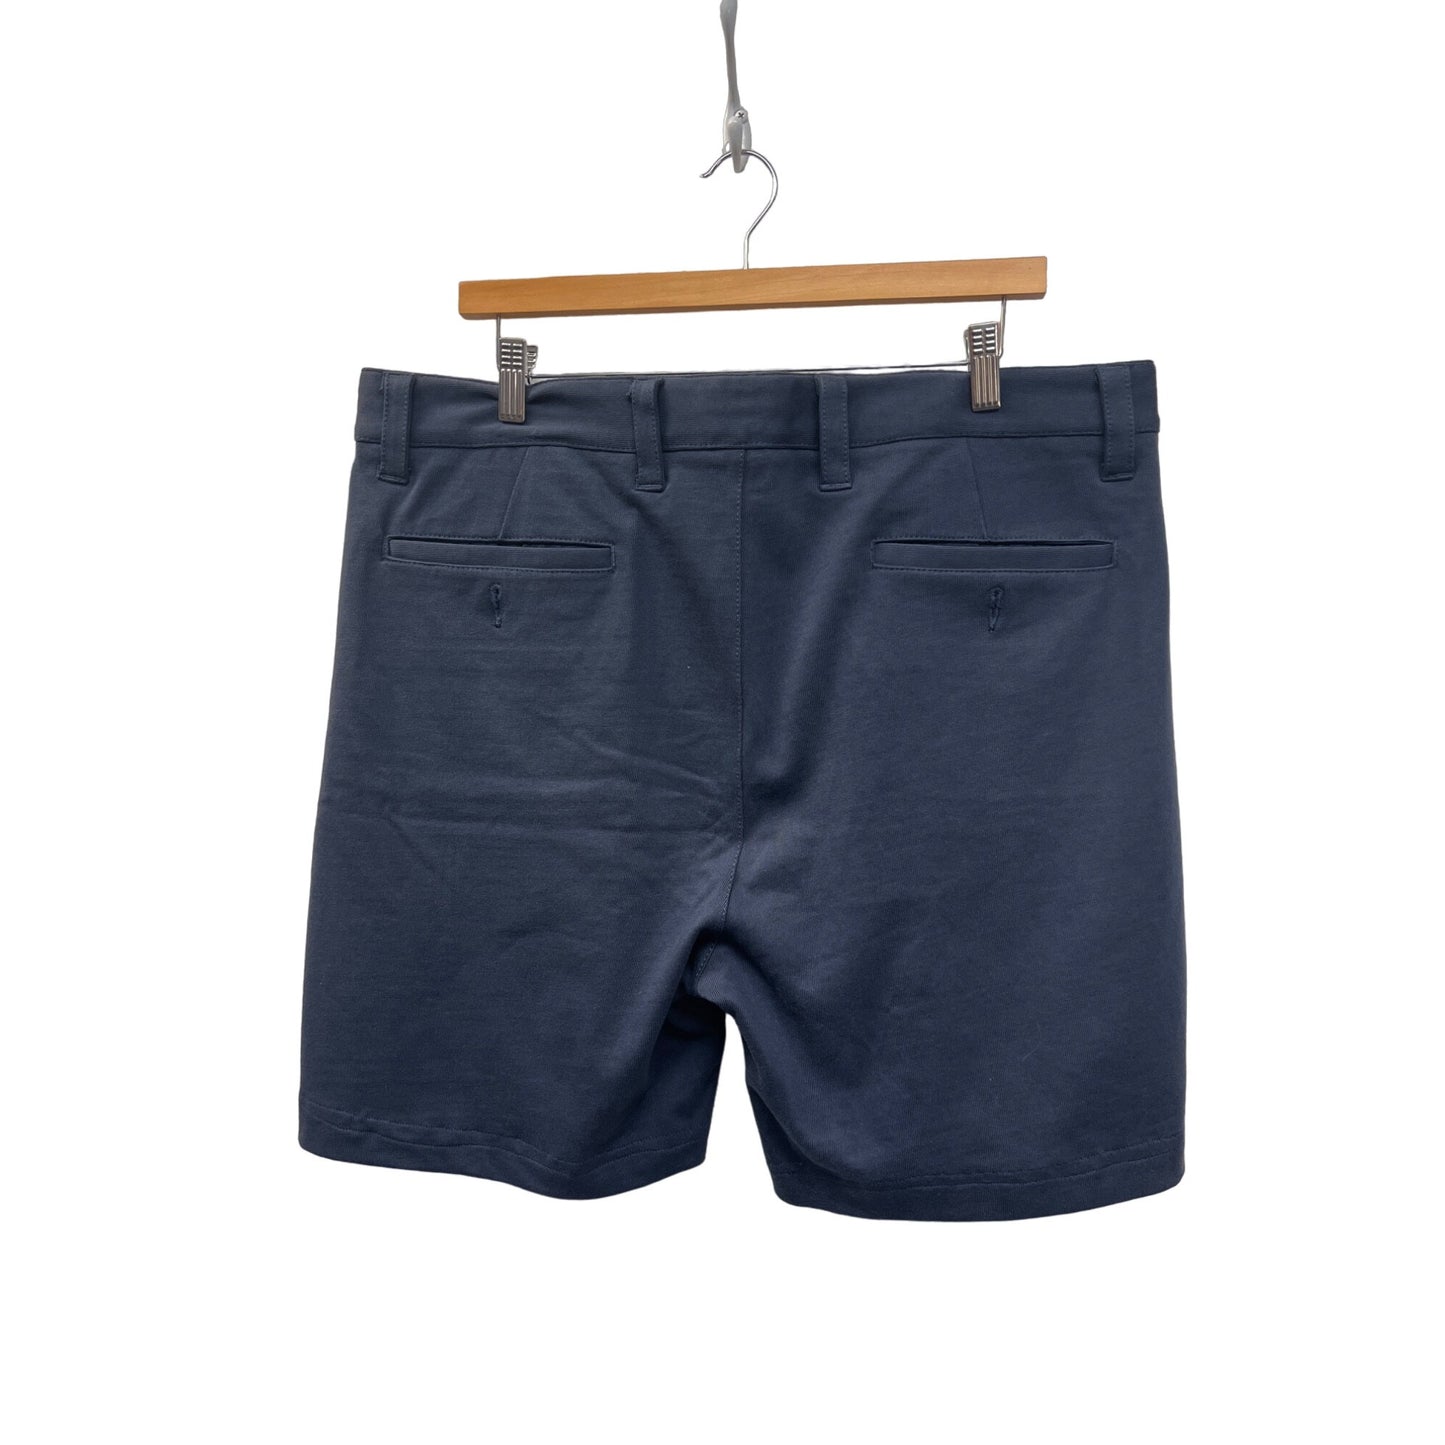 Tailor Vintage Westport Fit Navy Chino Shorts